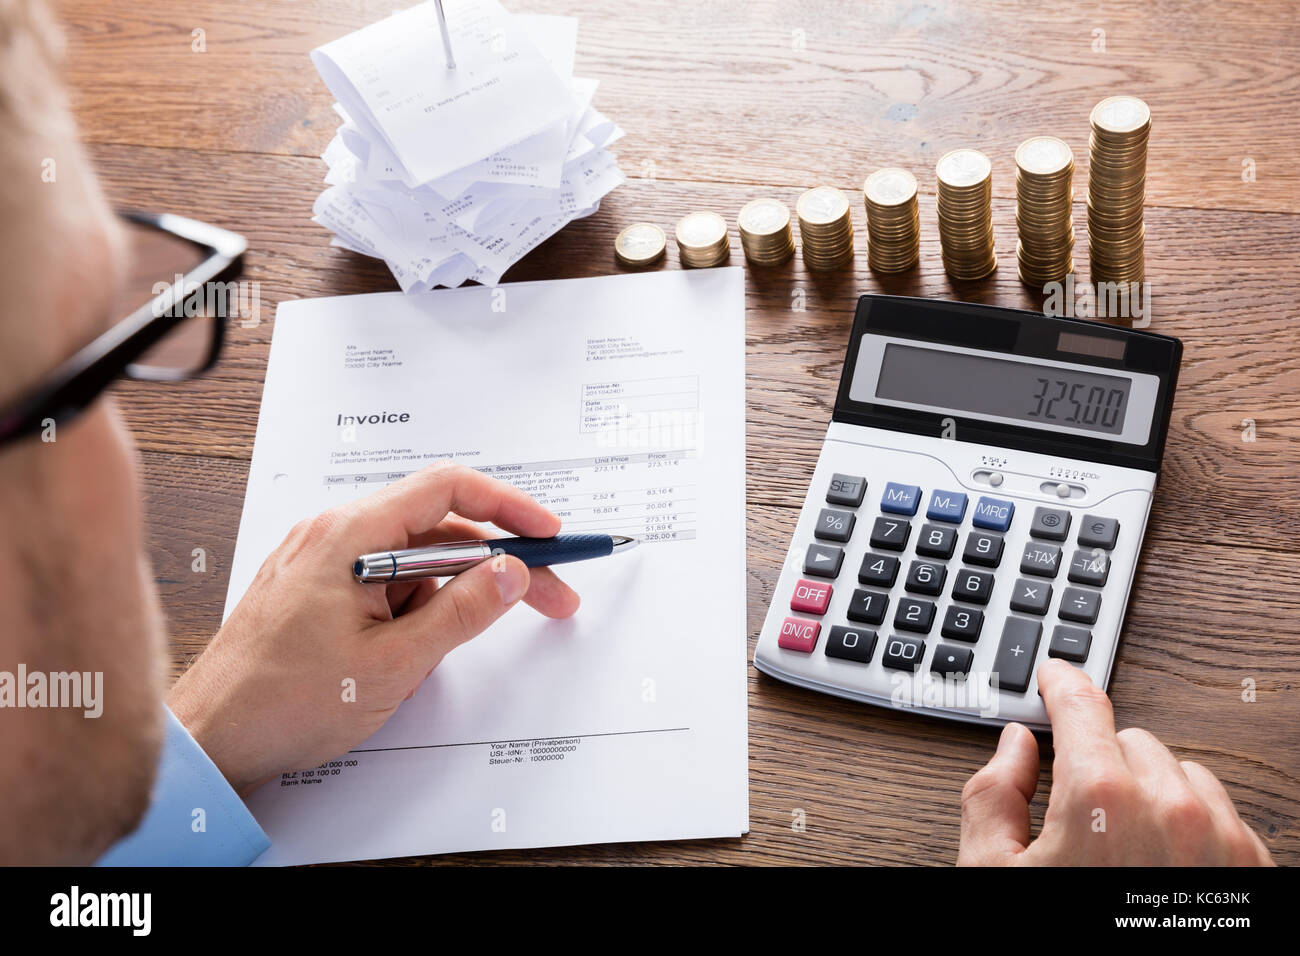 Accountant Calculating Tax Using Calculator On Wooden Desk. save Money Concept Stock Photo